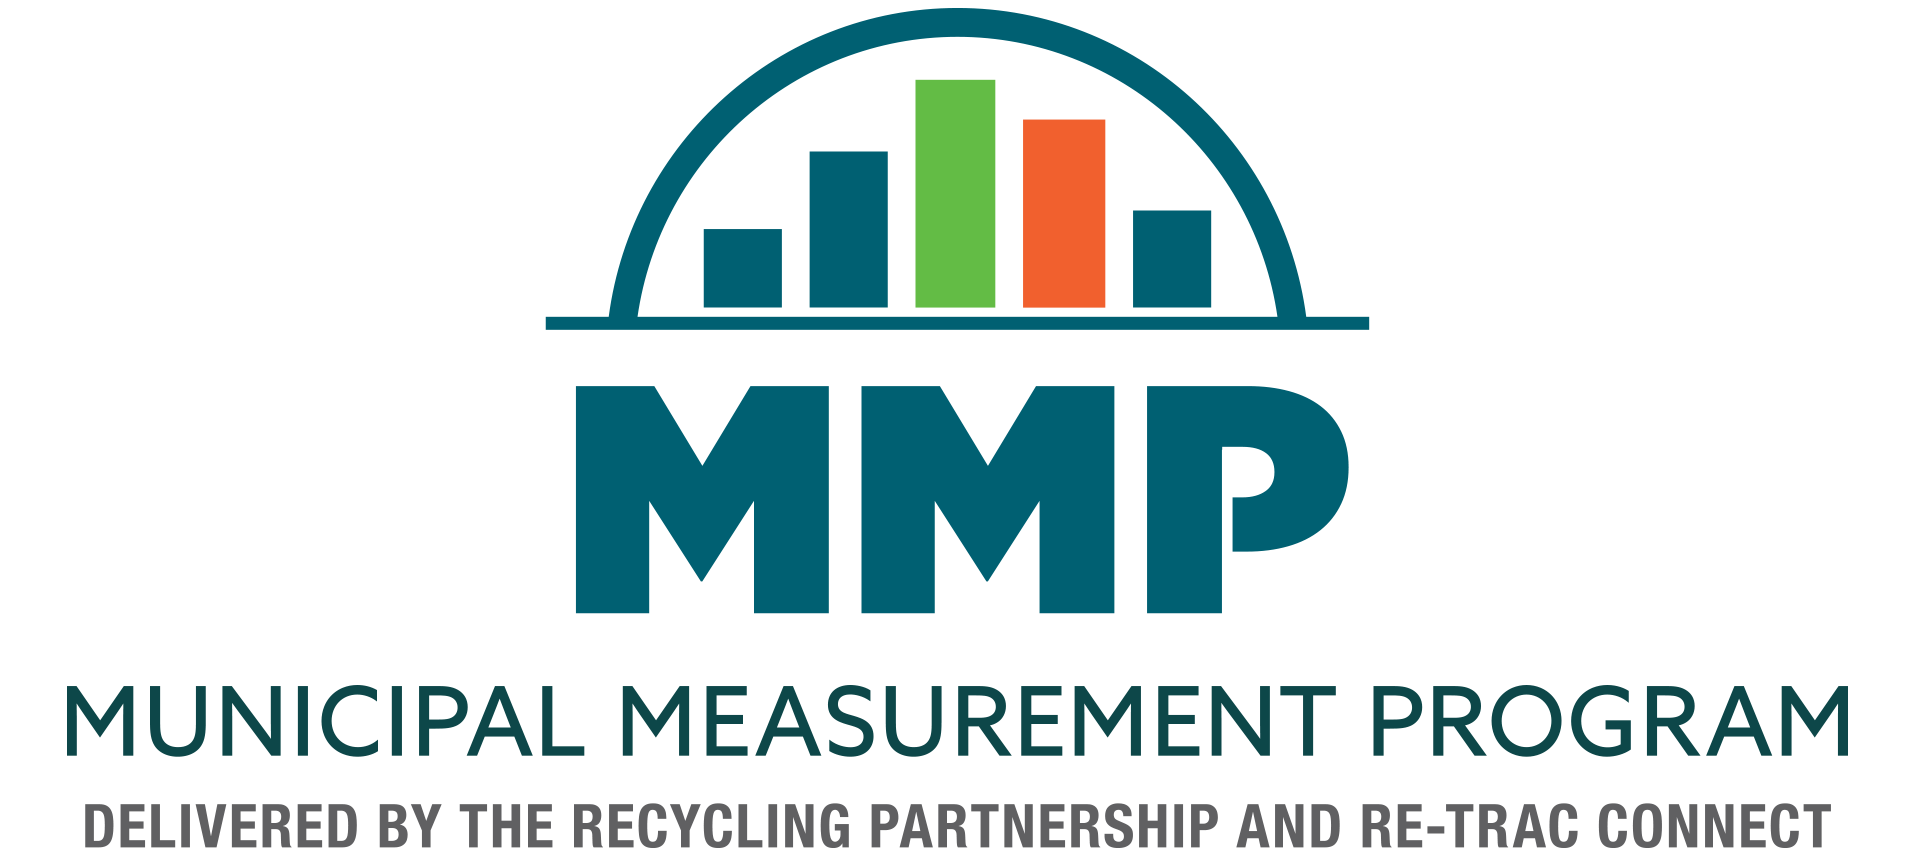 Municipal Measurement Program, delivered by the Recycling partnership and Re-TRAC connect